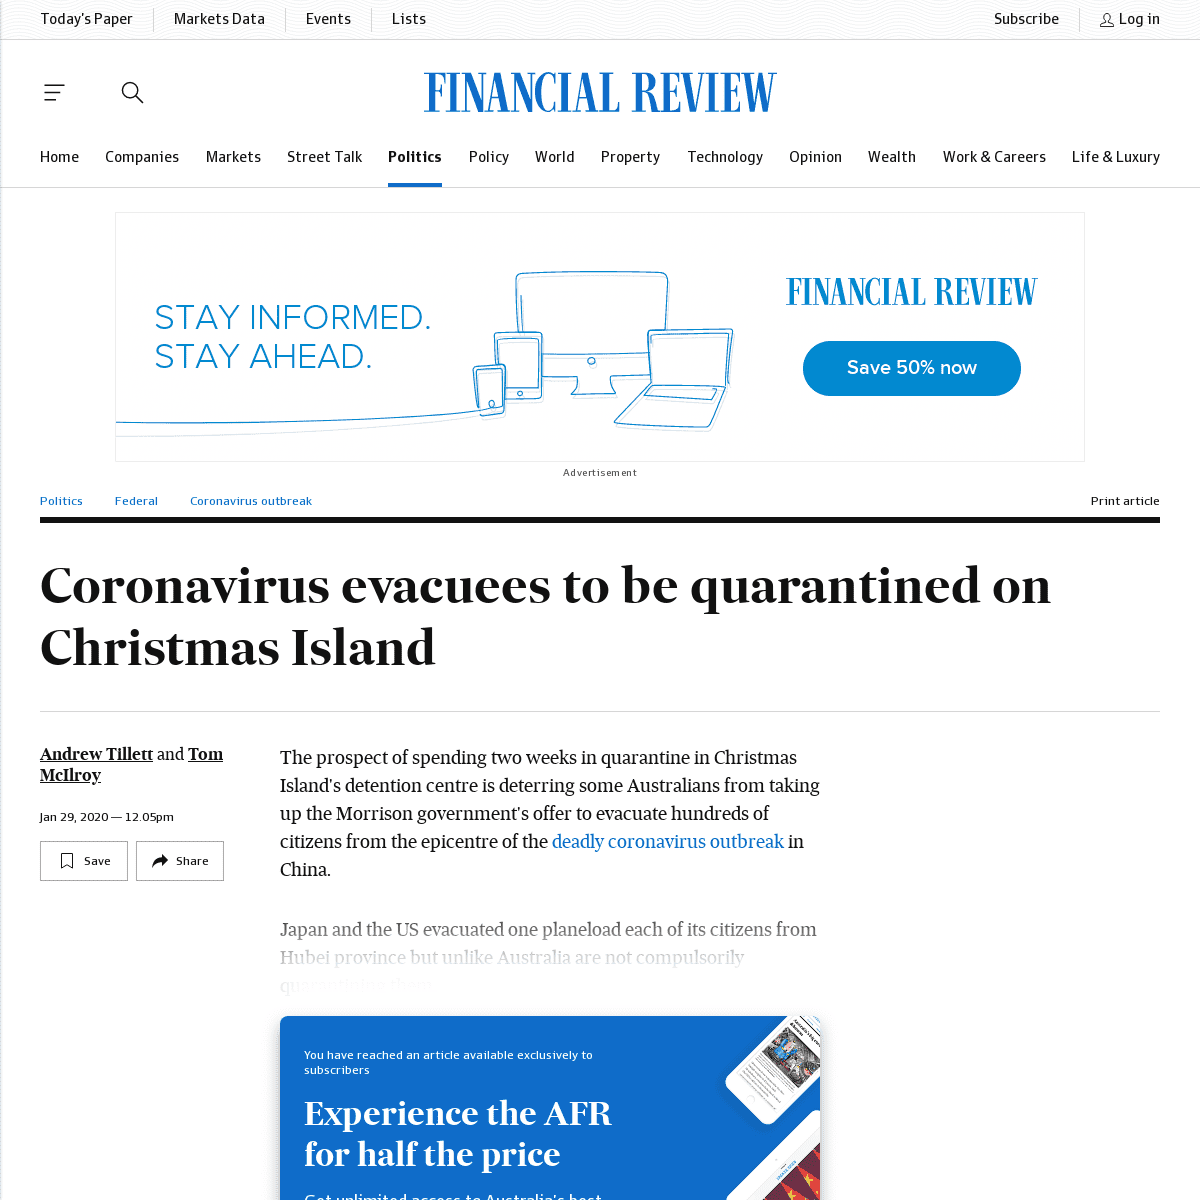 A complete backup of www.afr.com/politics/federal/australians-to-be-quarantined-on-christmas-island-20200129-p53vqb